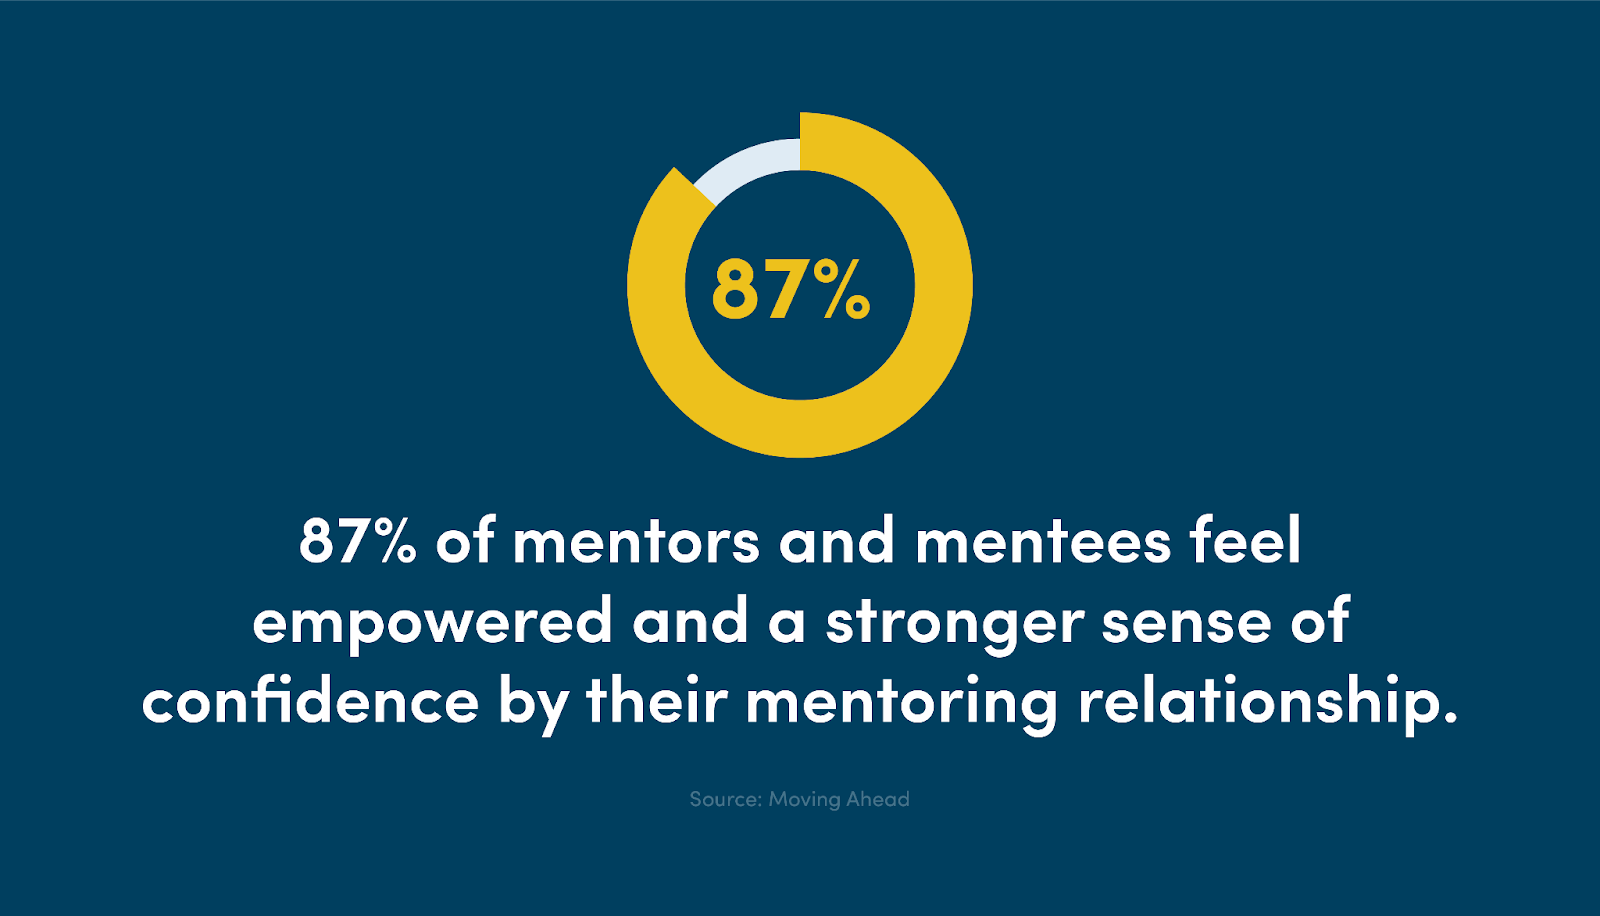 87% of mentors and mentees feel empowered and a stronger sense of confidence by their mentoring relationship.